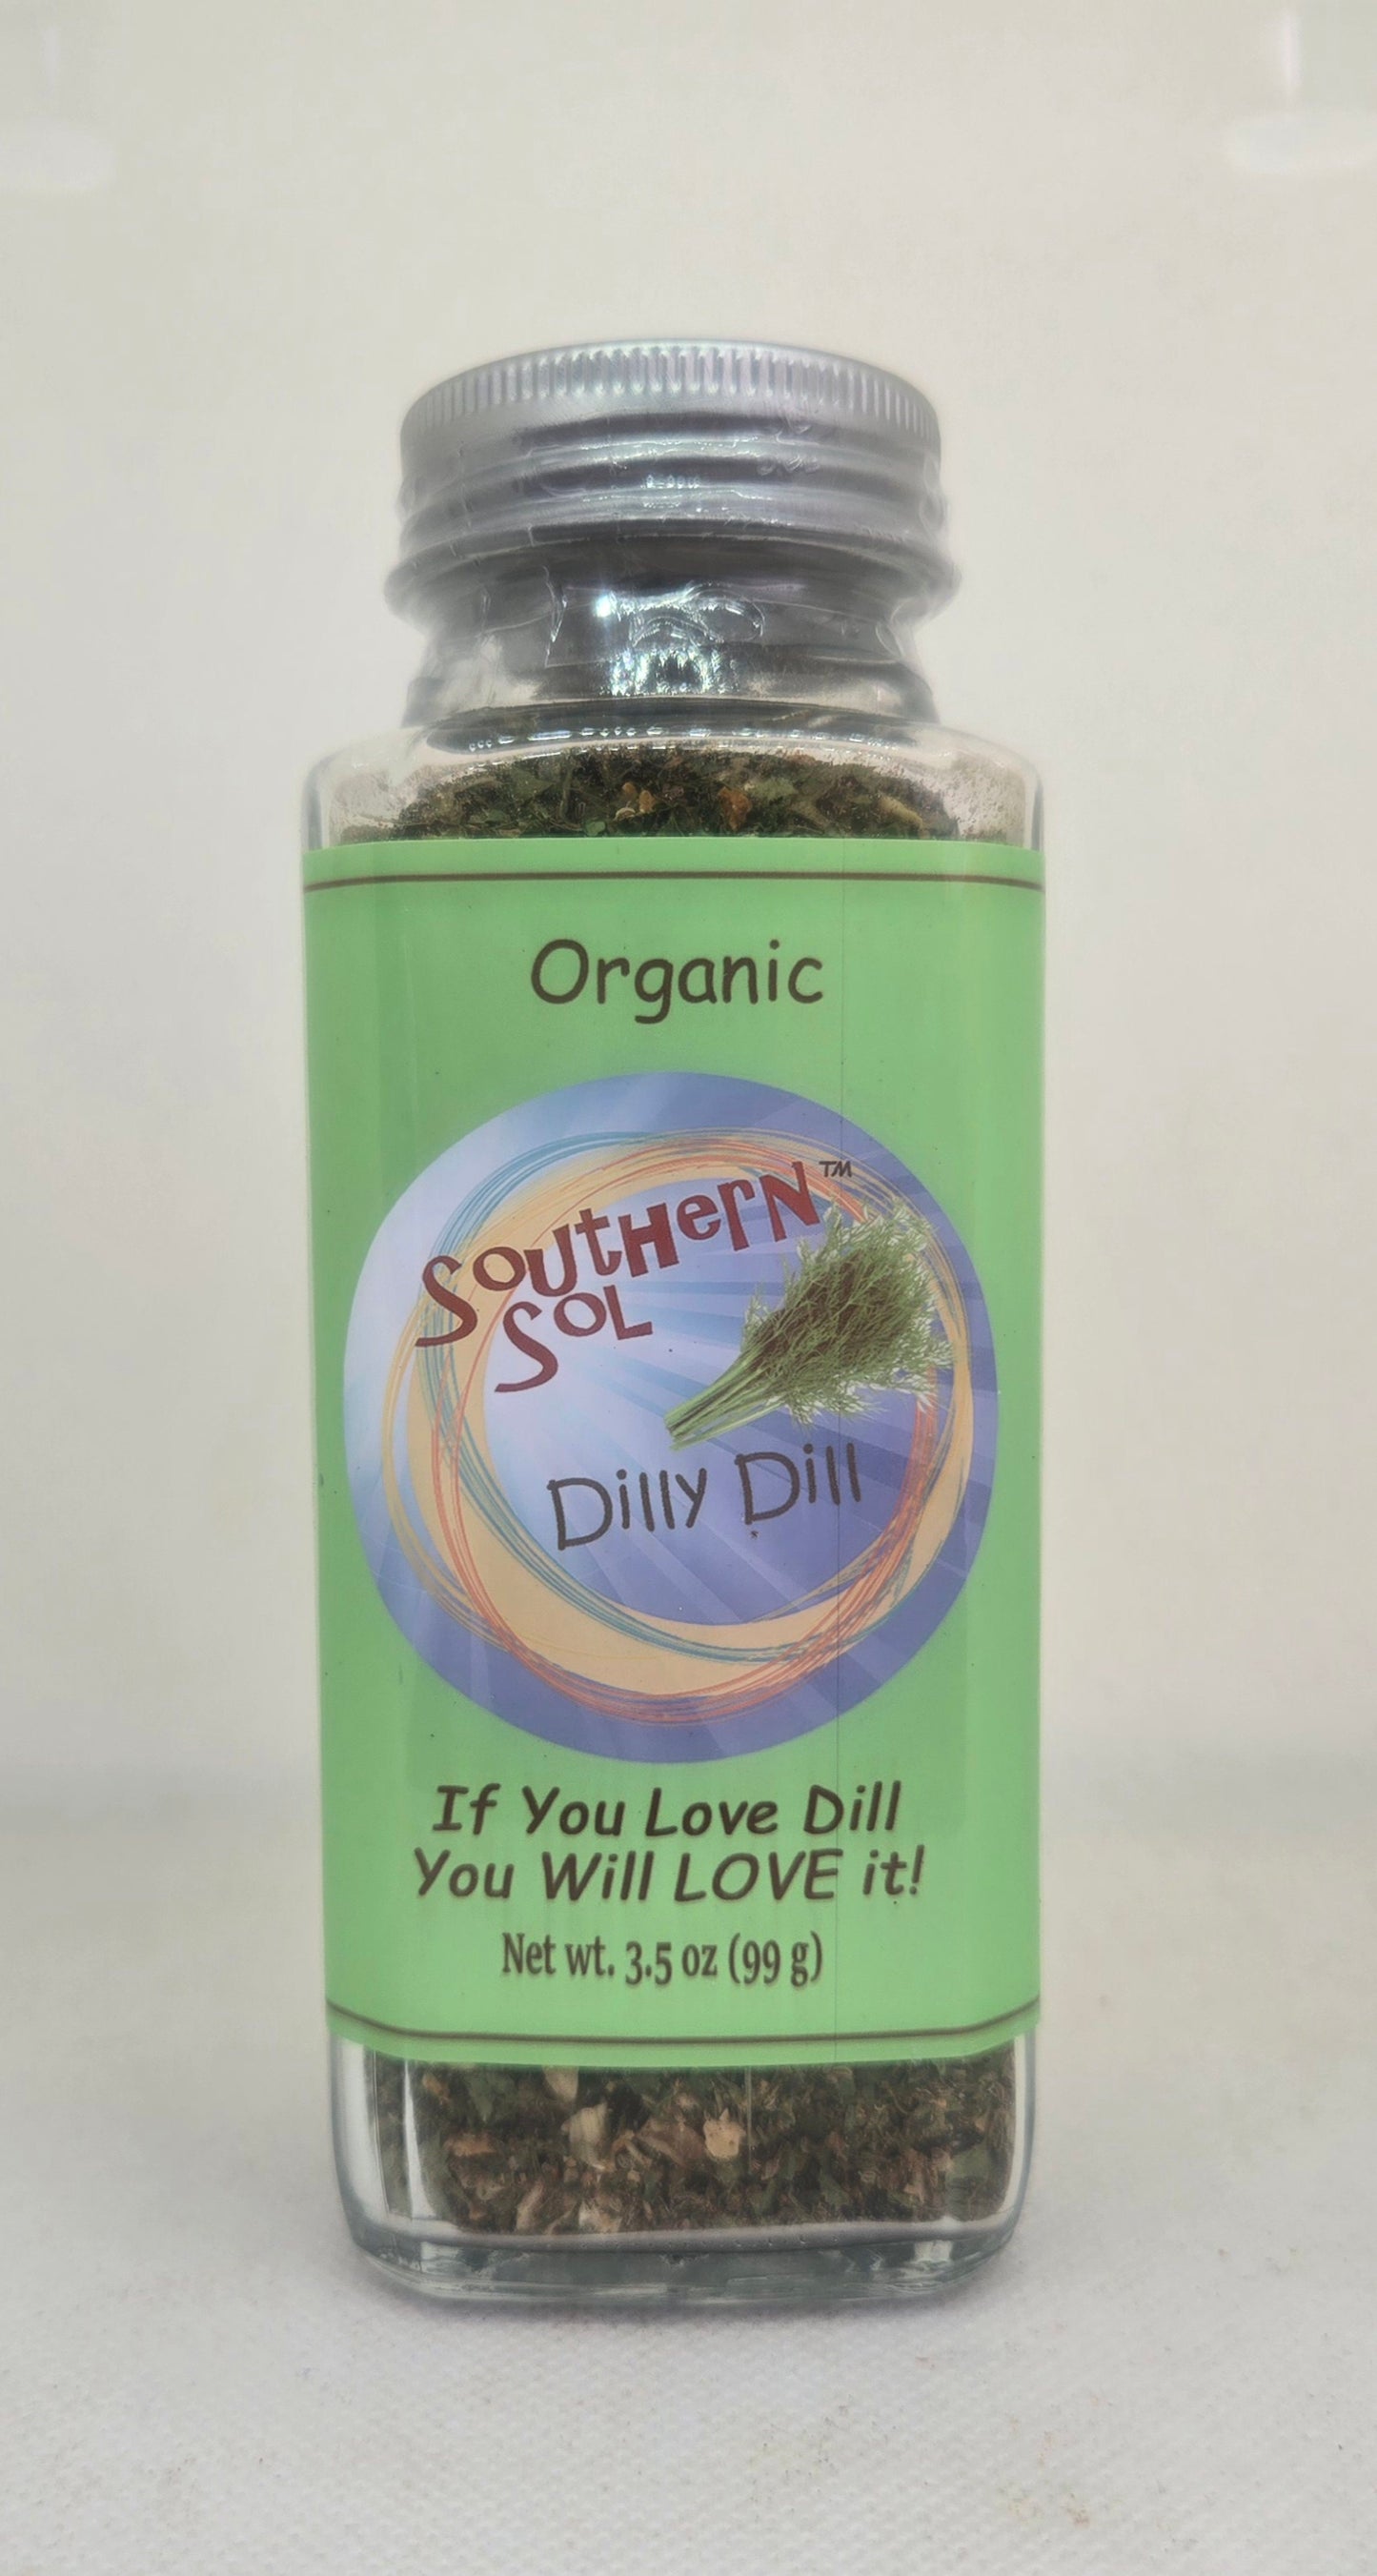 Dilly Dill Spice Blend - Southern Sol